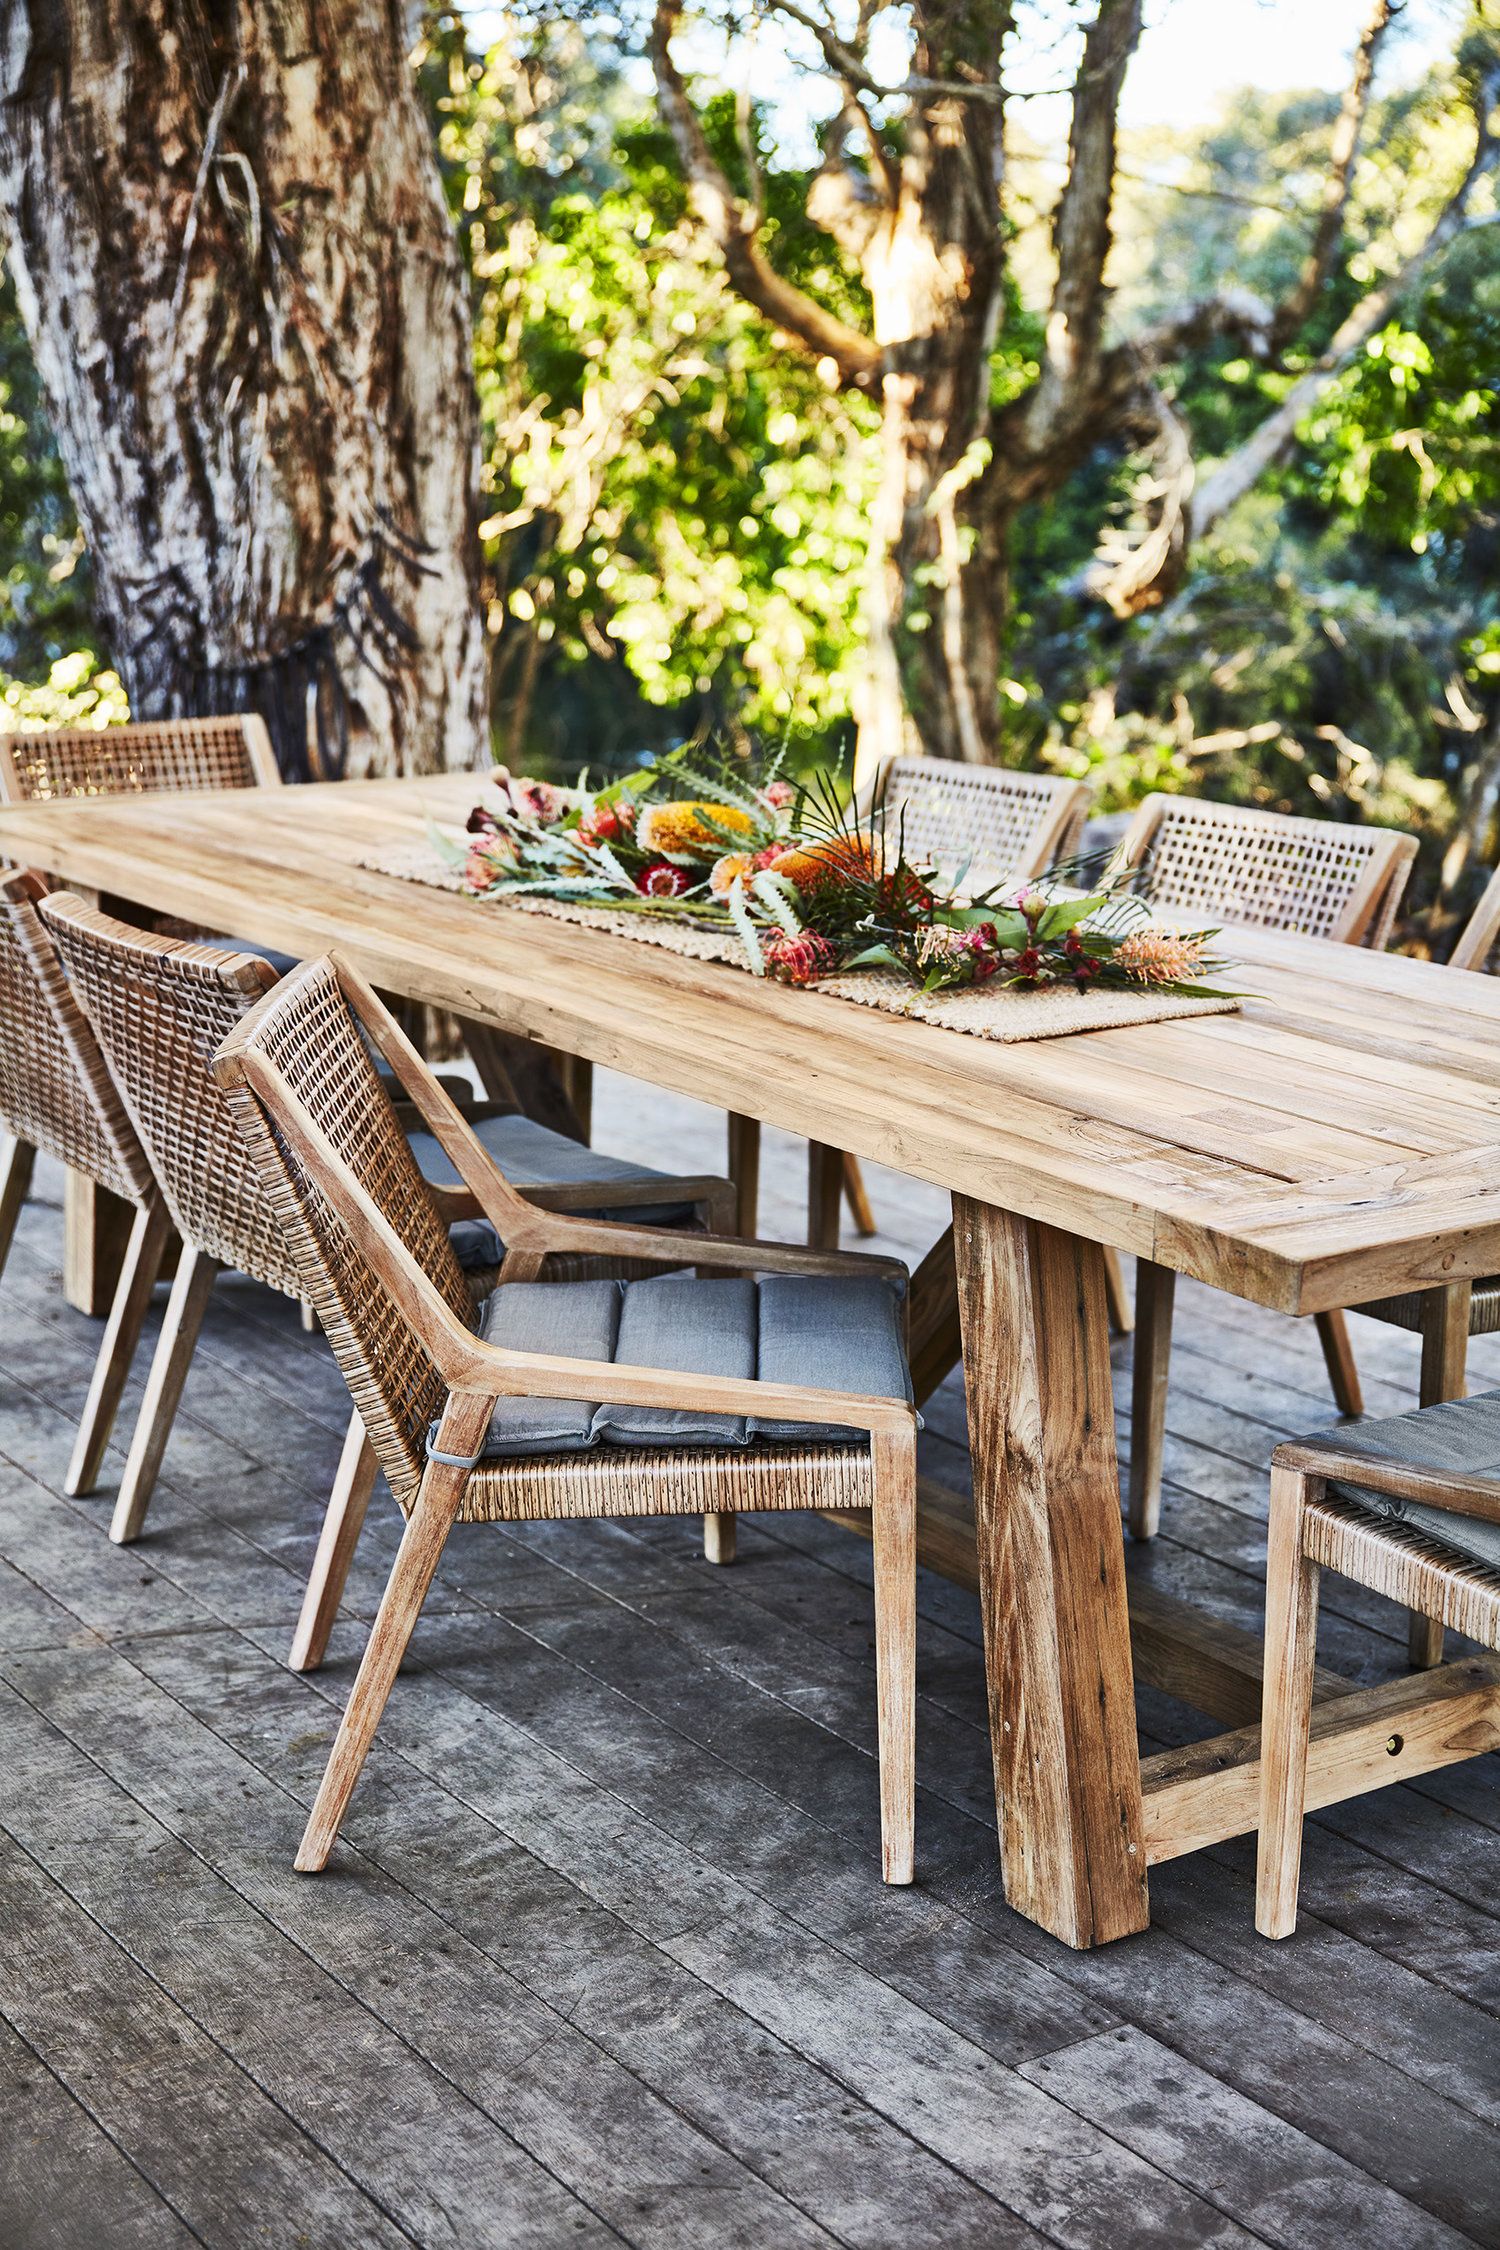 Enhance Your Outdoor Experience with Stylish Dining Furniture